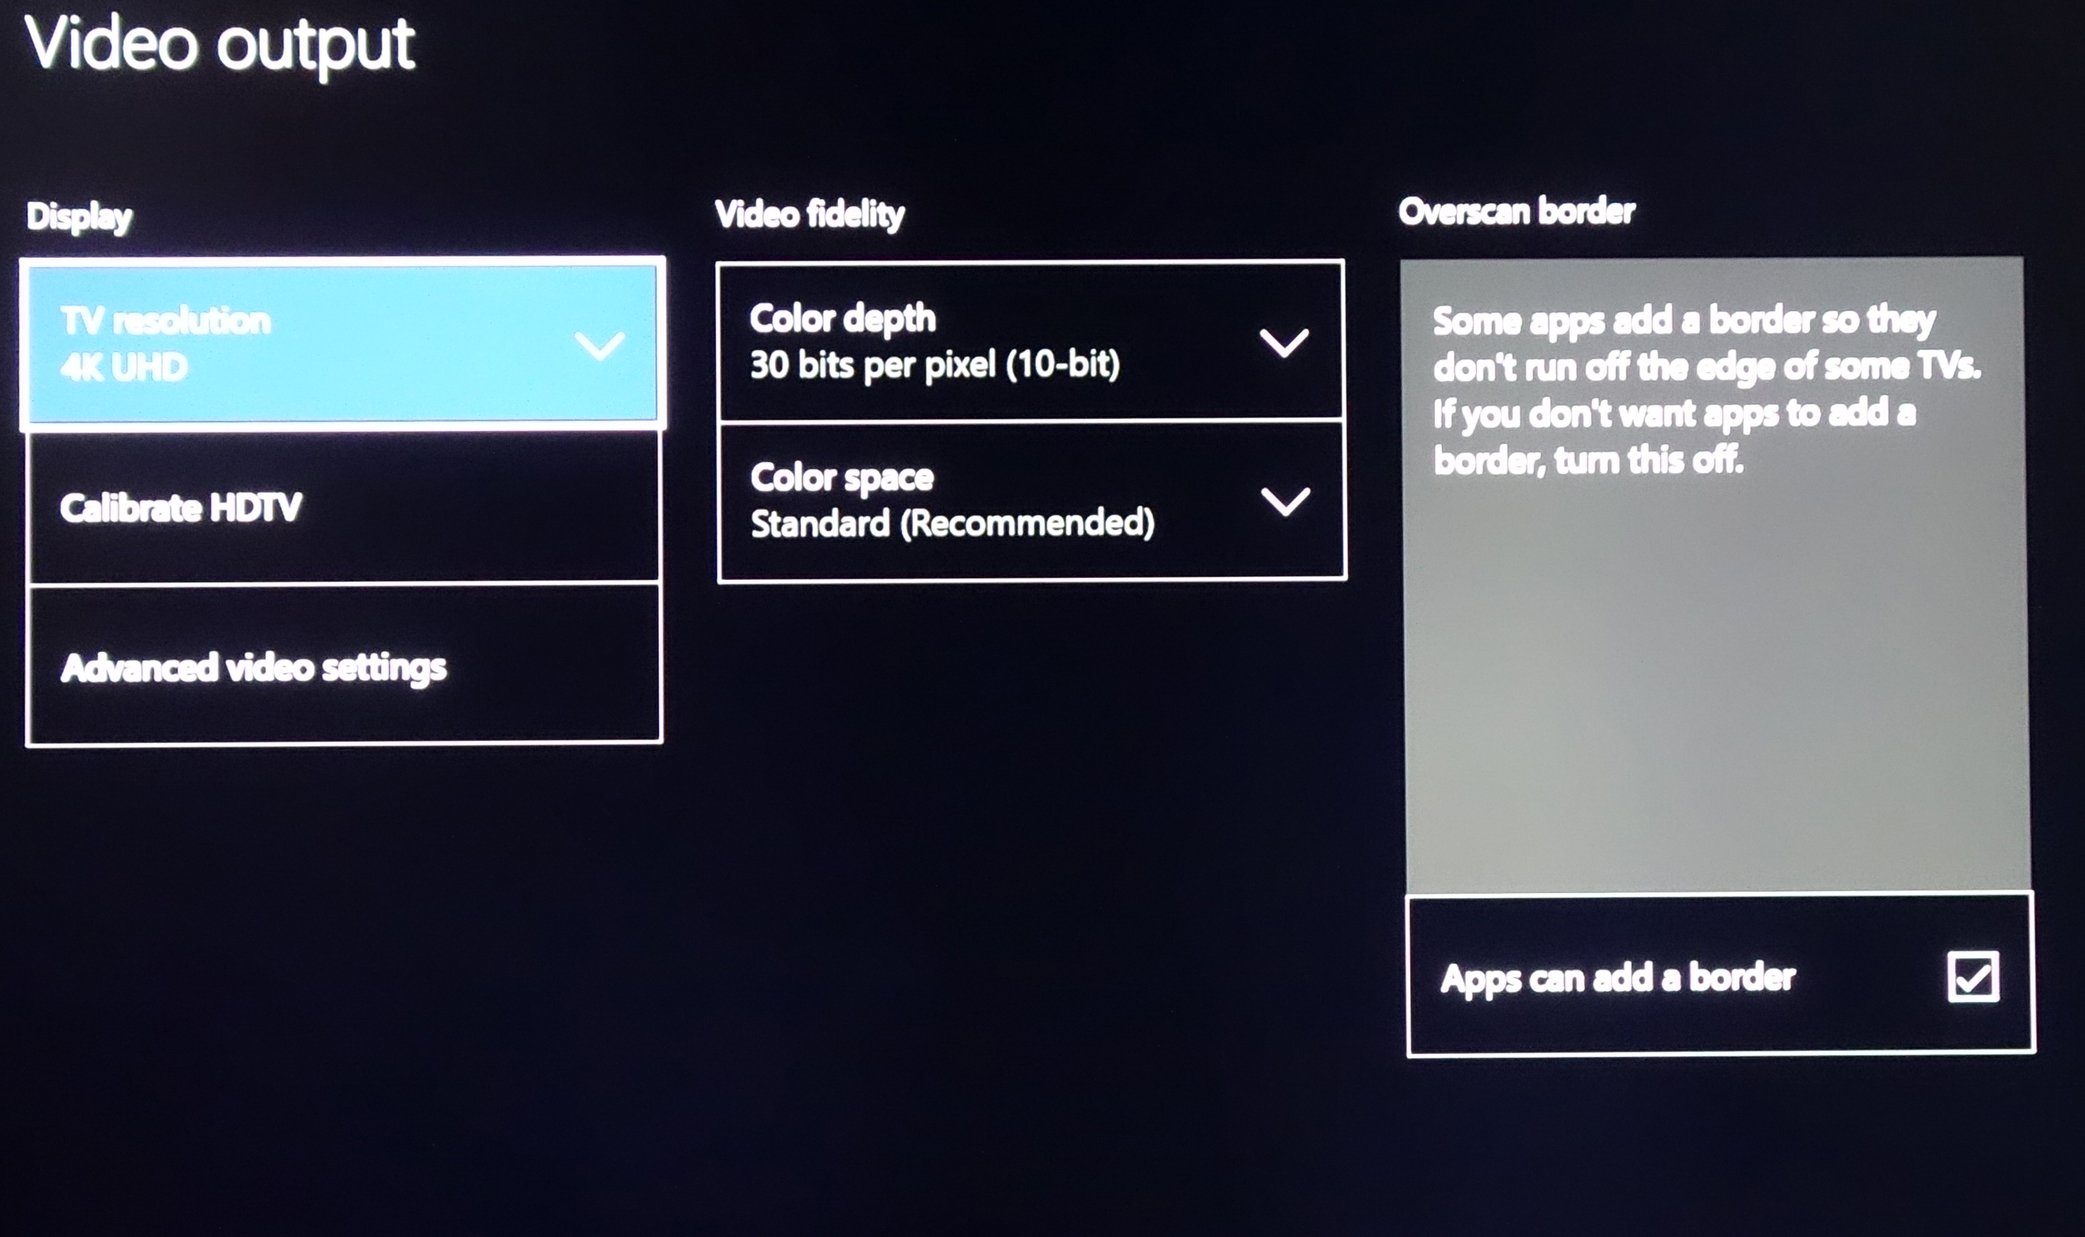 Xbox One S Video Output